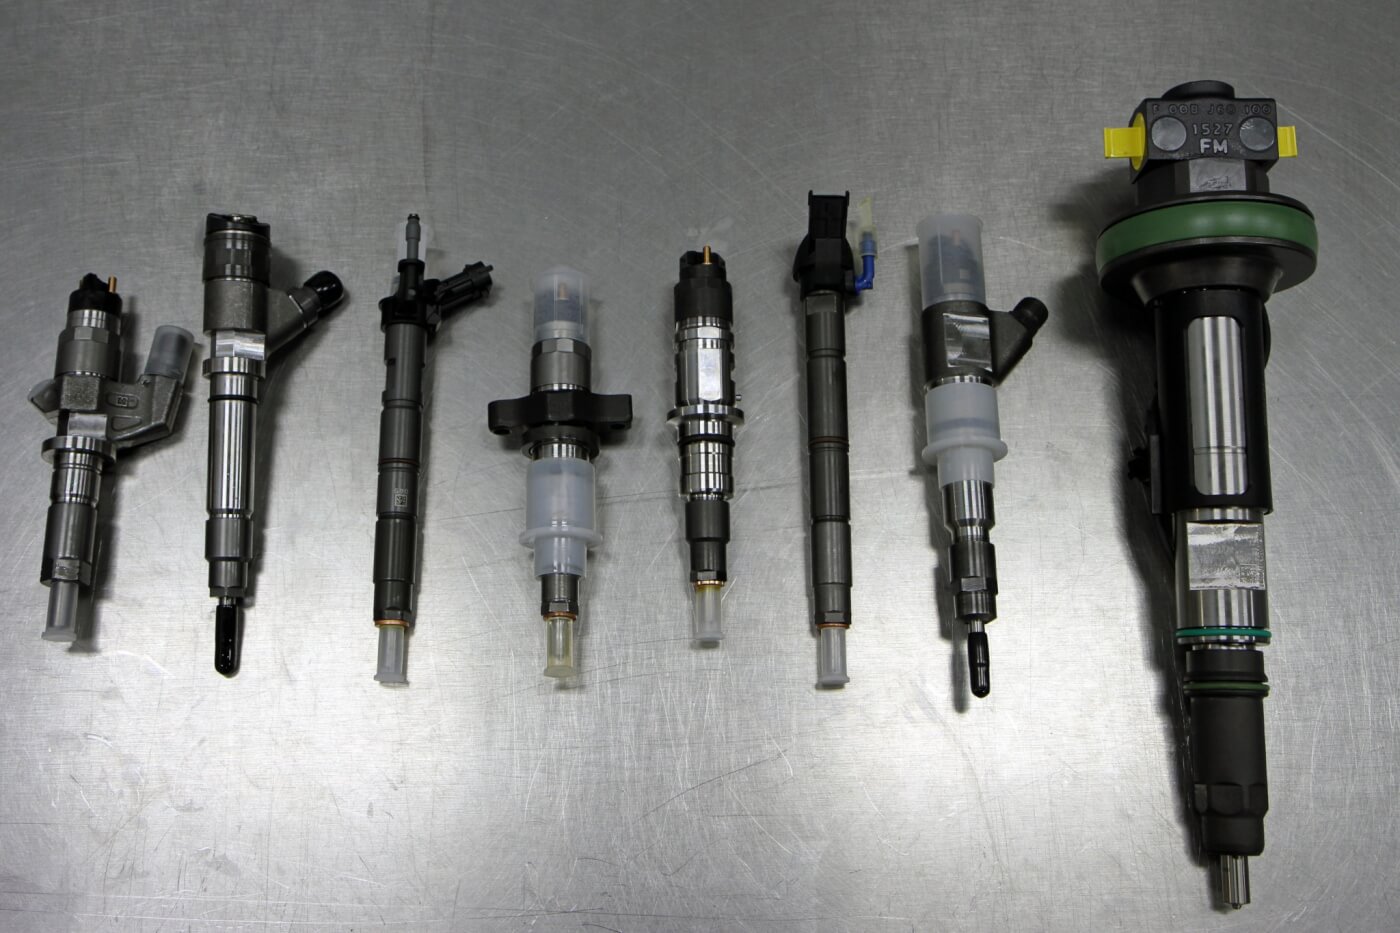 14. Here is a selection of some of the injector options offered by S&S Diesel Motorsport covering everything from stock type injectors up to monster injectors for custom applications. From left to right are injectors for an LB7, LBZ, LML (piezoelectric), 5.9L Cummins, 6.7L Cummins (next gen), 6.7L Scorpion, Case IH and LE (Large Engine with 2.5 to 3.0L per cylinder).